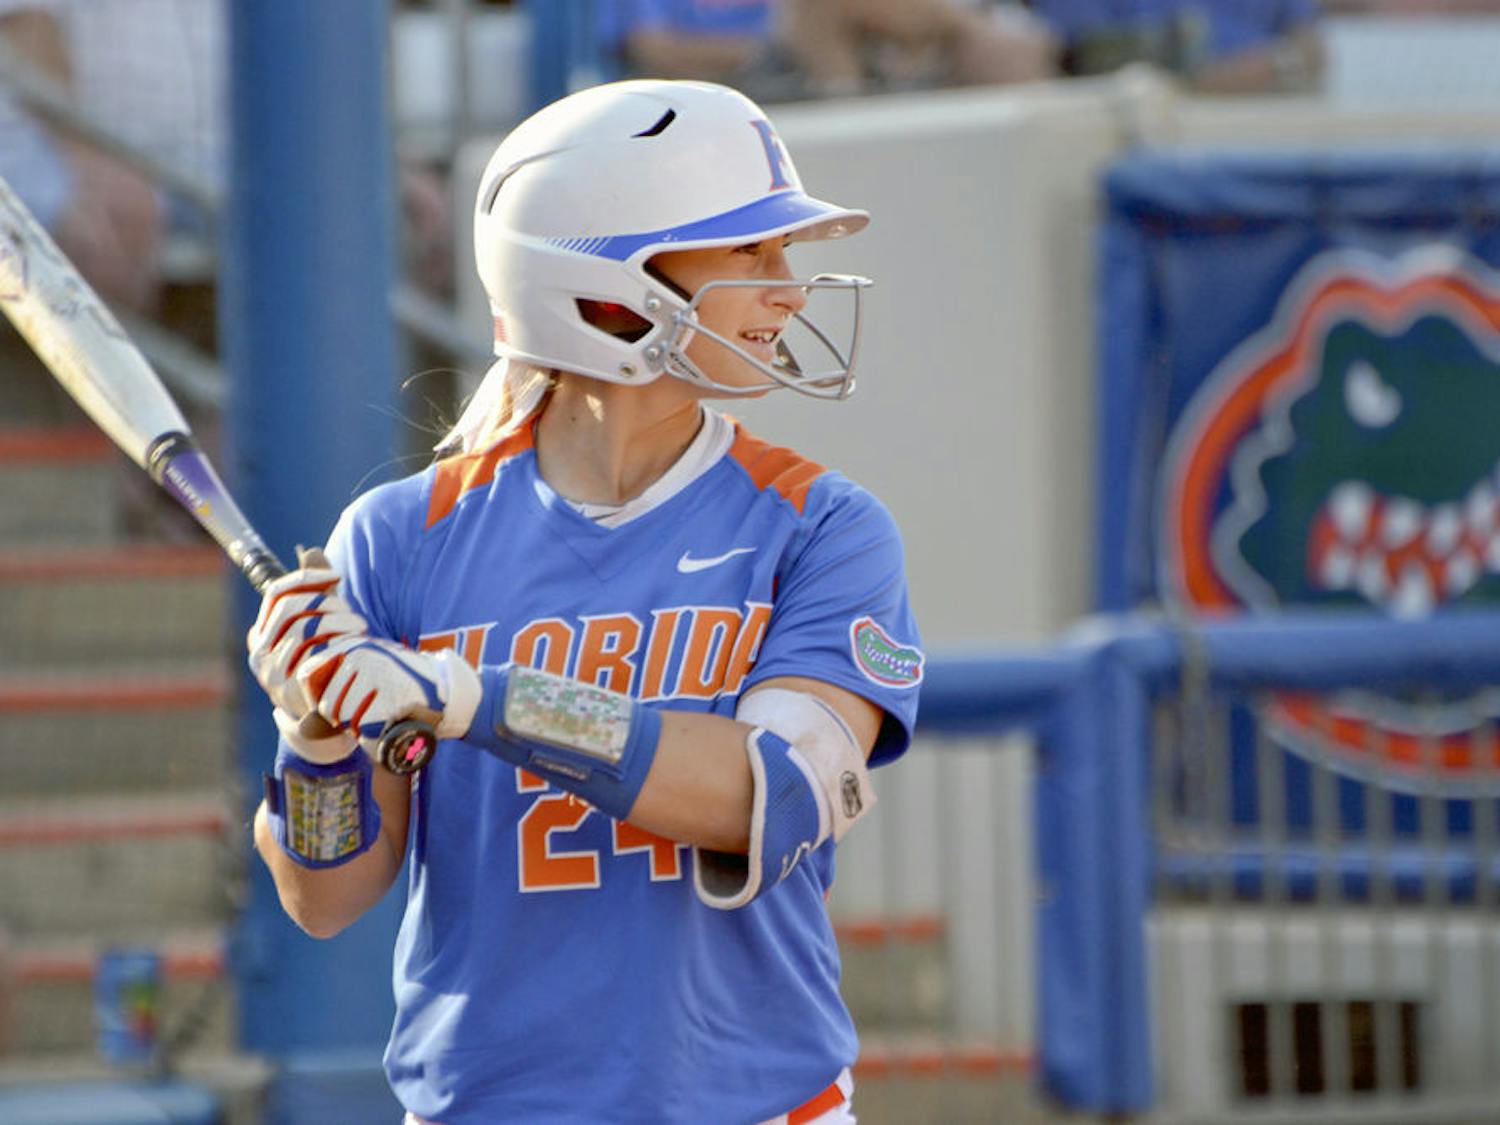 UF junior outfielder Kirsti Merritt smiles as she goes up for an at-bat during Florida's 2-1 win against North Florida on April 1, 2015, at Katie Seashole Pressly Stadium.